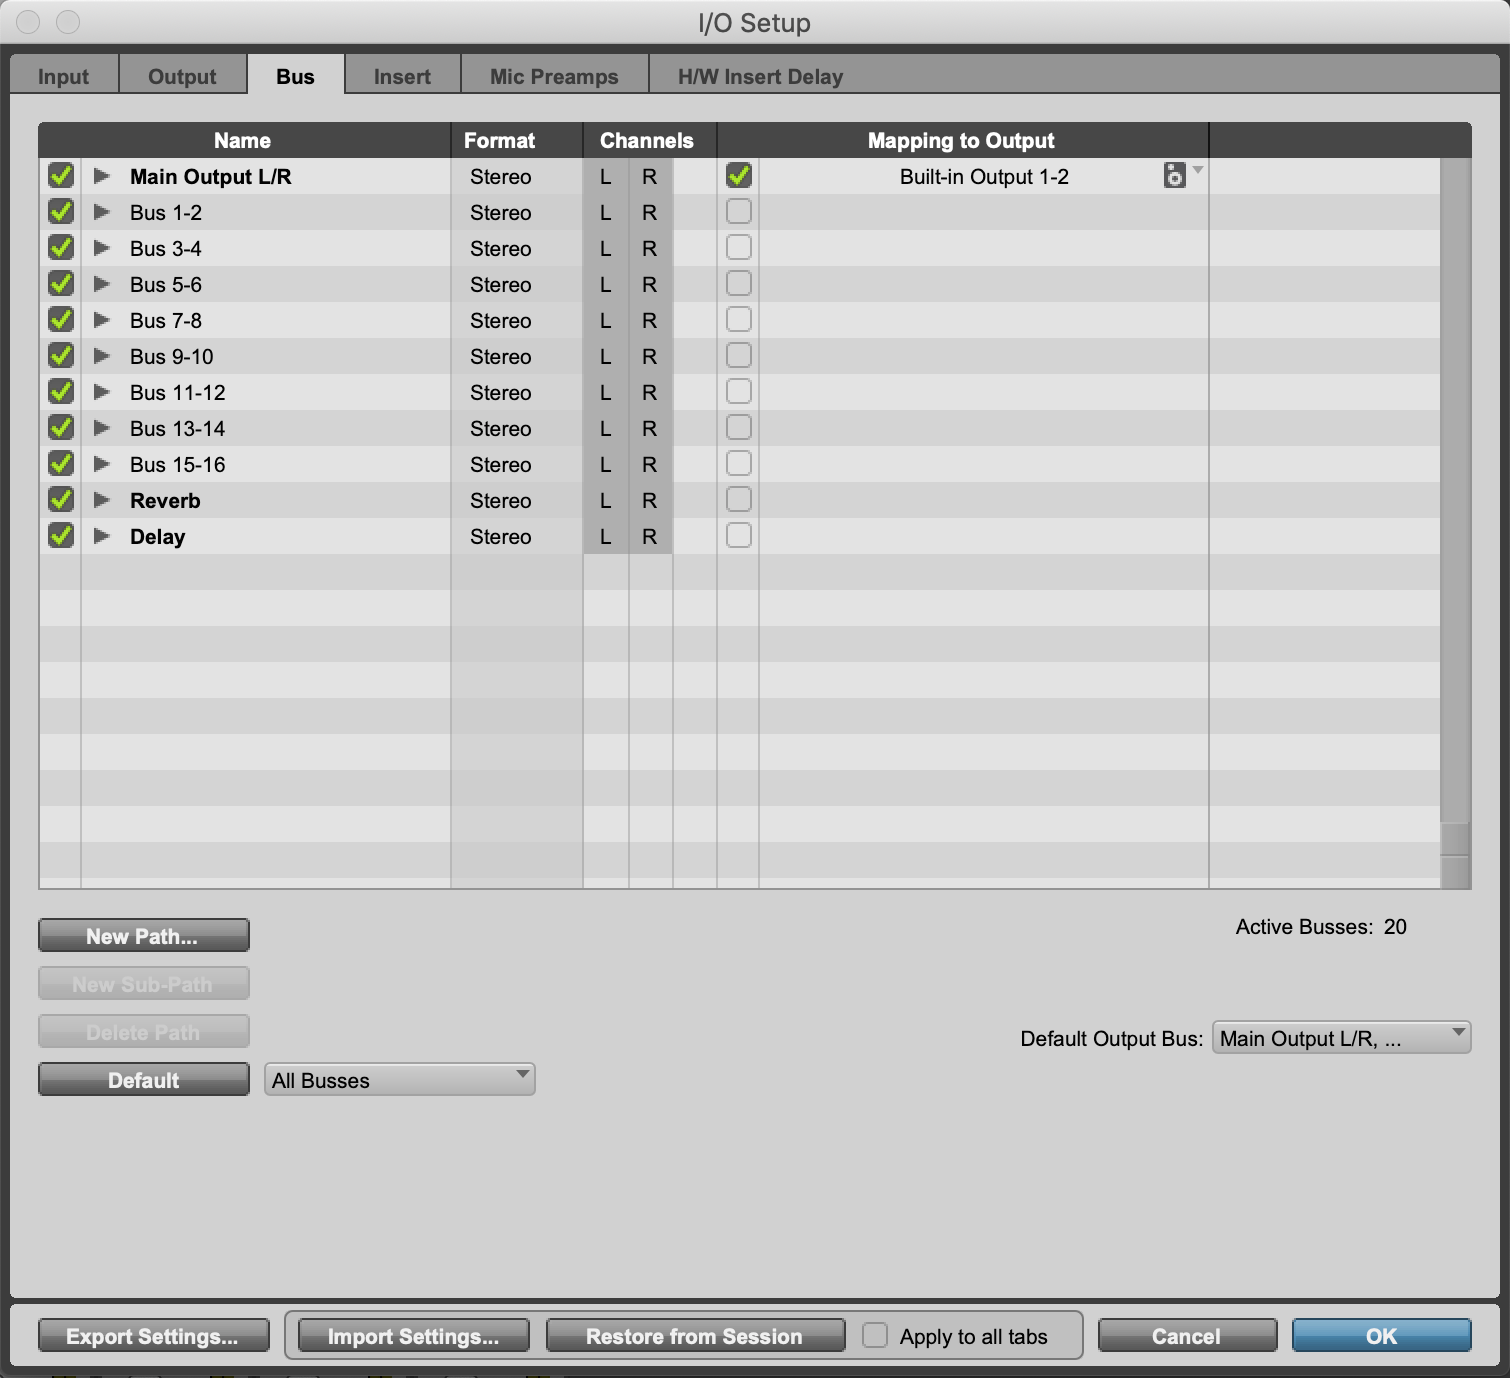 The I/O window is where you can manage busses in Pro Tools